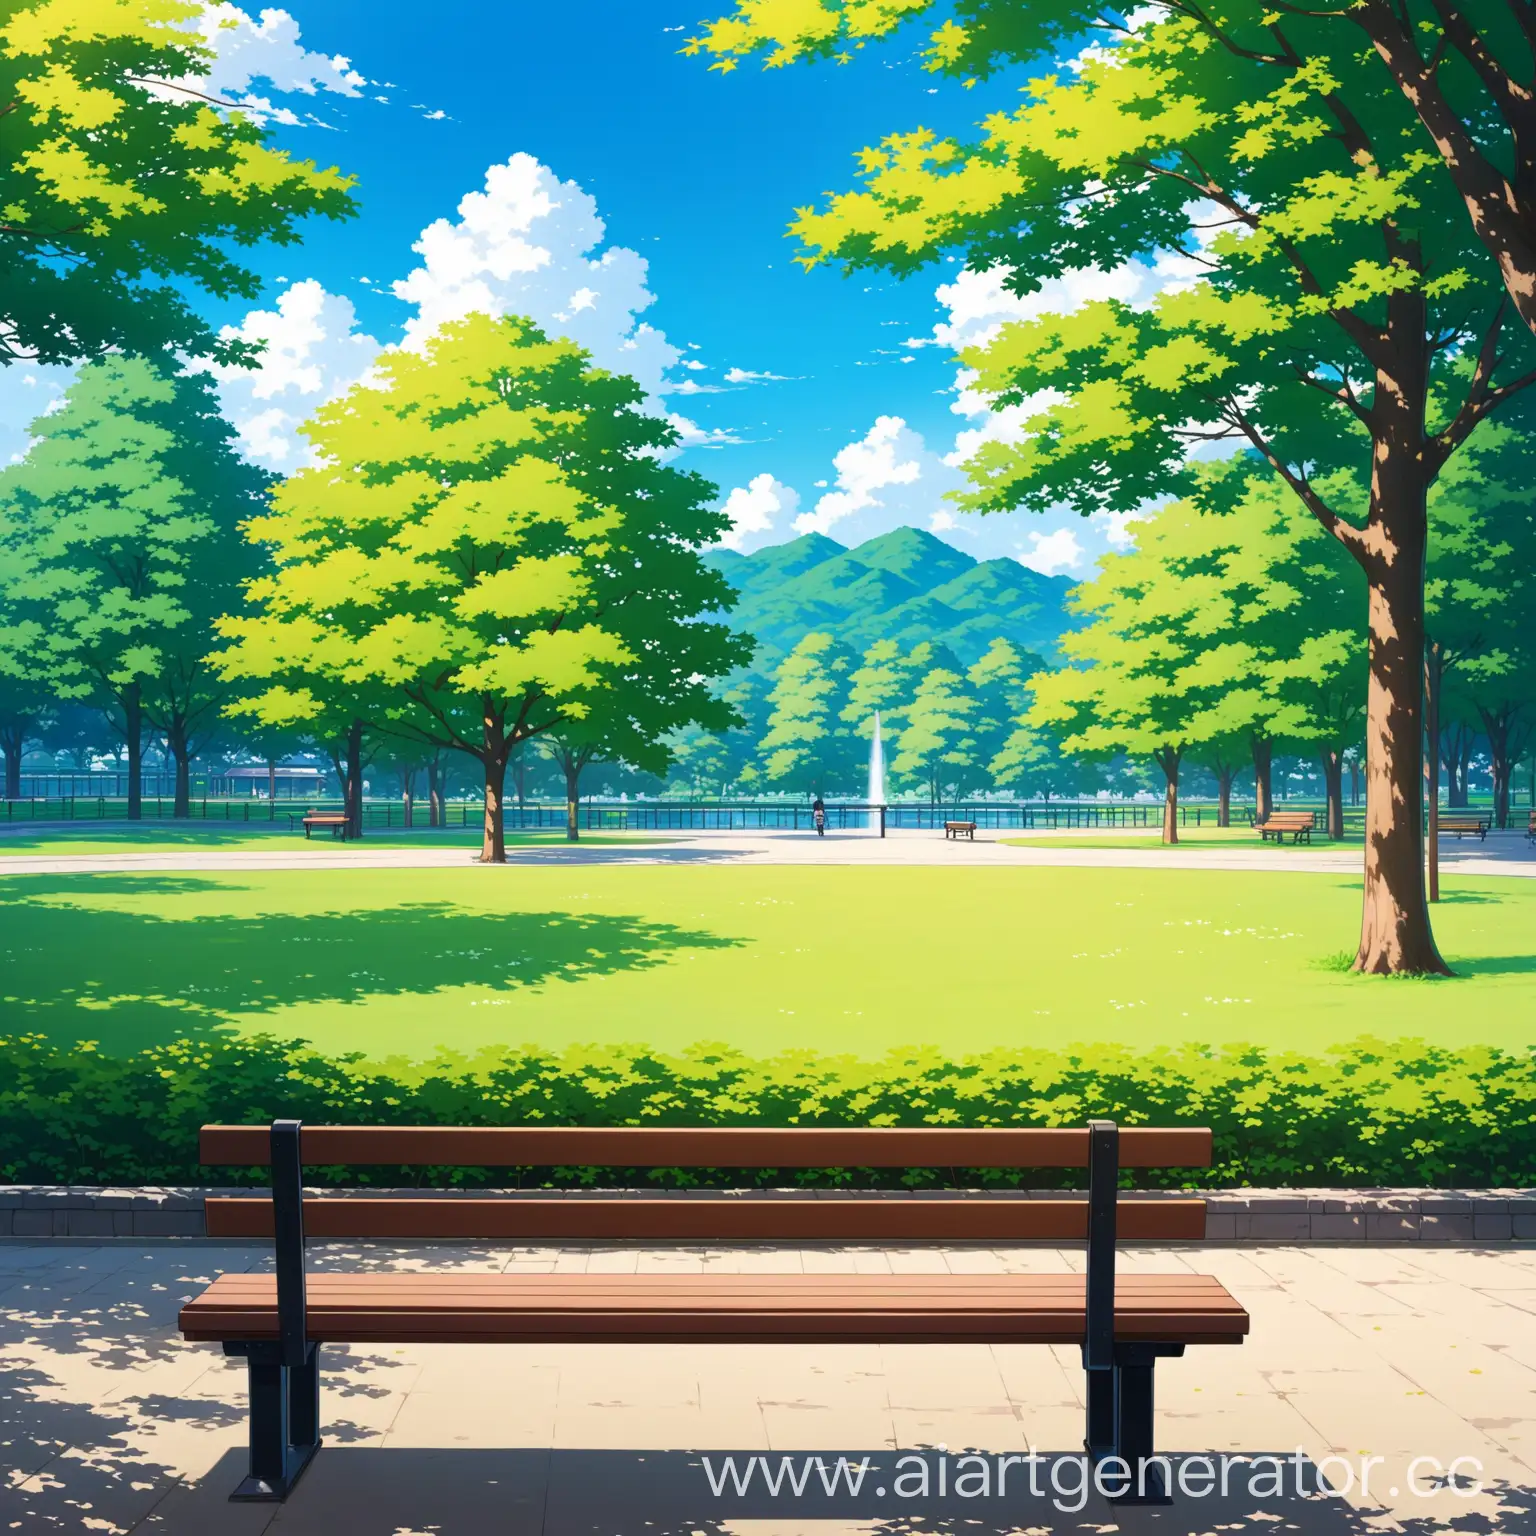 Anime-Scene-in-Daytime-Japanese-Park-View-from-Bench